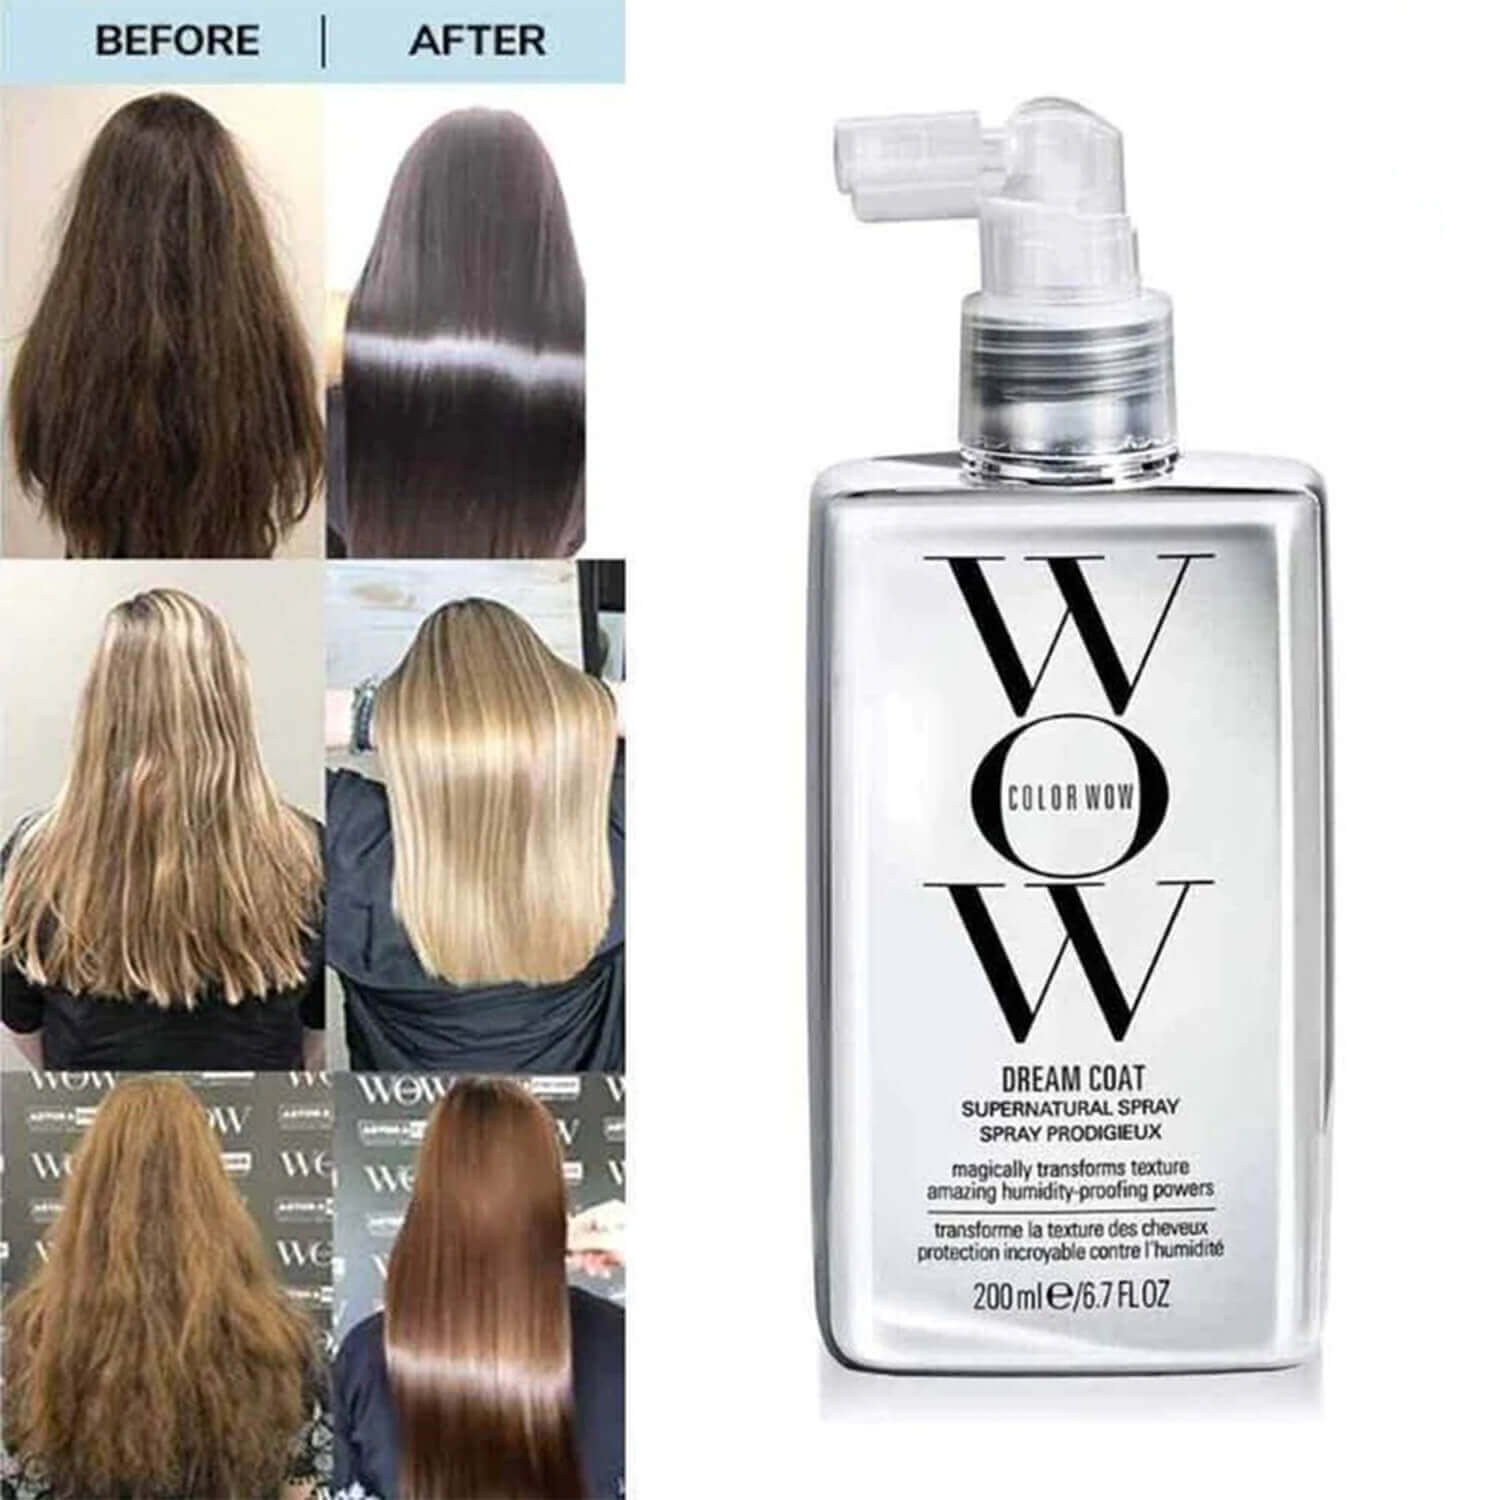 Shop Color Wow Anti-Frizz Super Stars Set available at Heygirl.pk for delivery in Pakistan